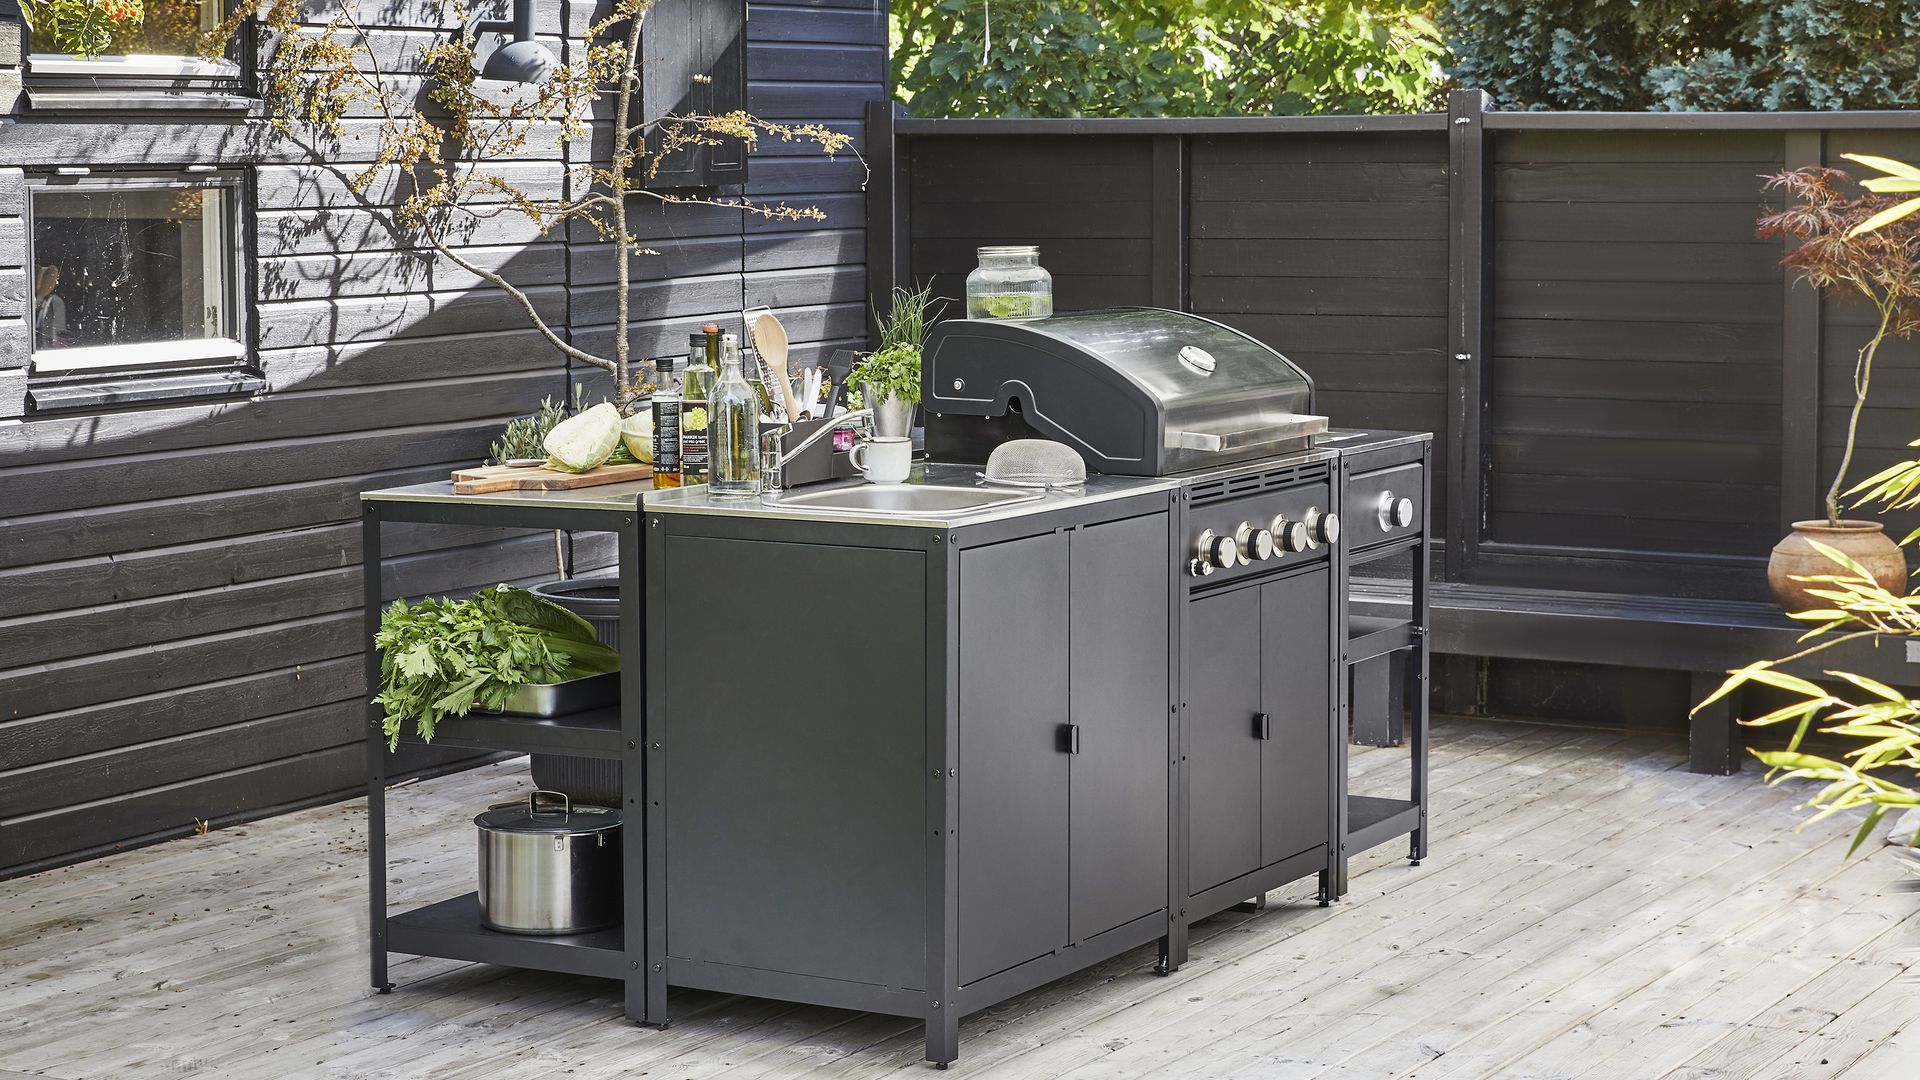 How to light a BBQ: tips, tricks and hacks to ignite a grill | Real Homes